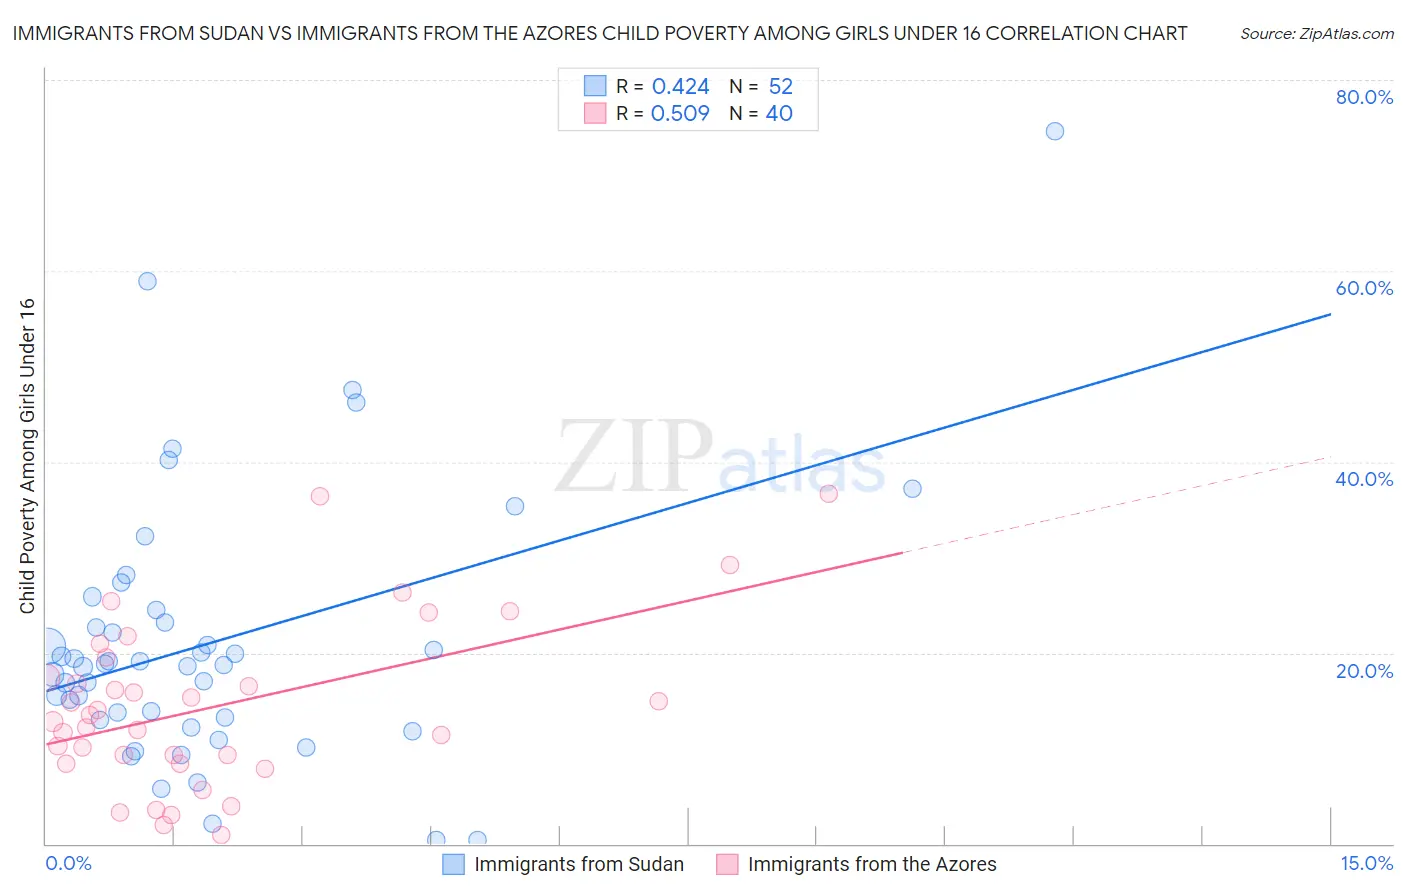 Immigrants from Sudan vs Immigrants from the Azores Child Poverty Among Girls Under 16